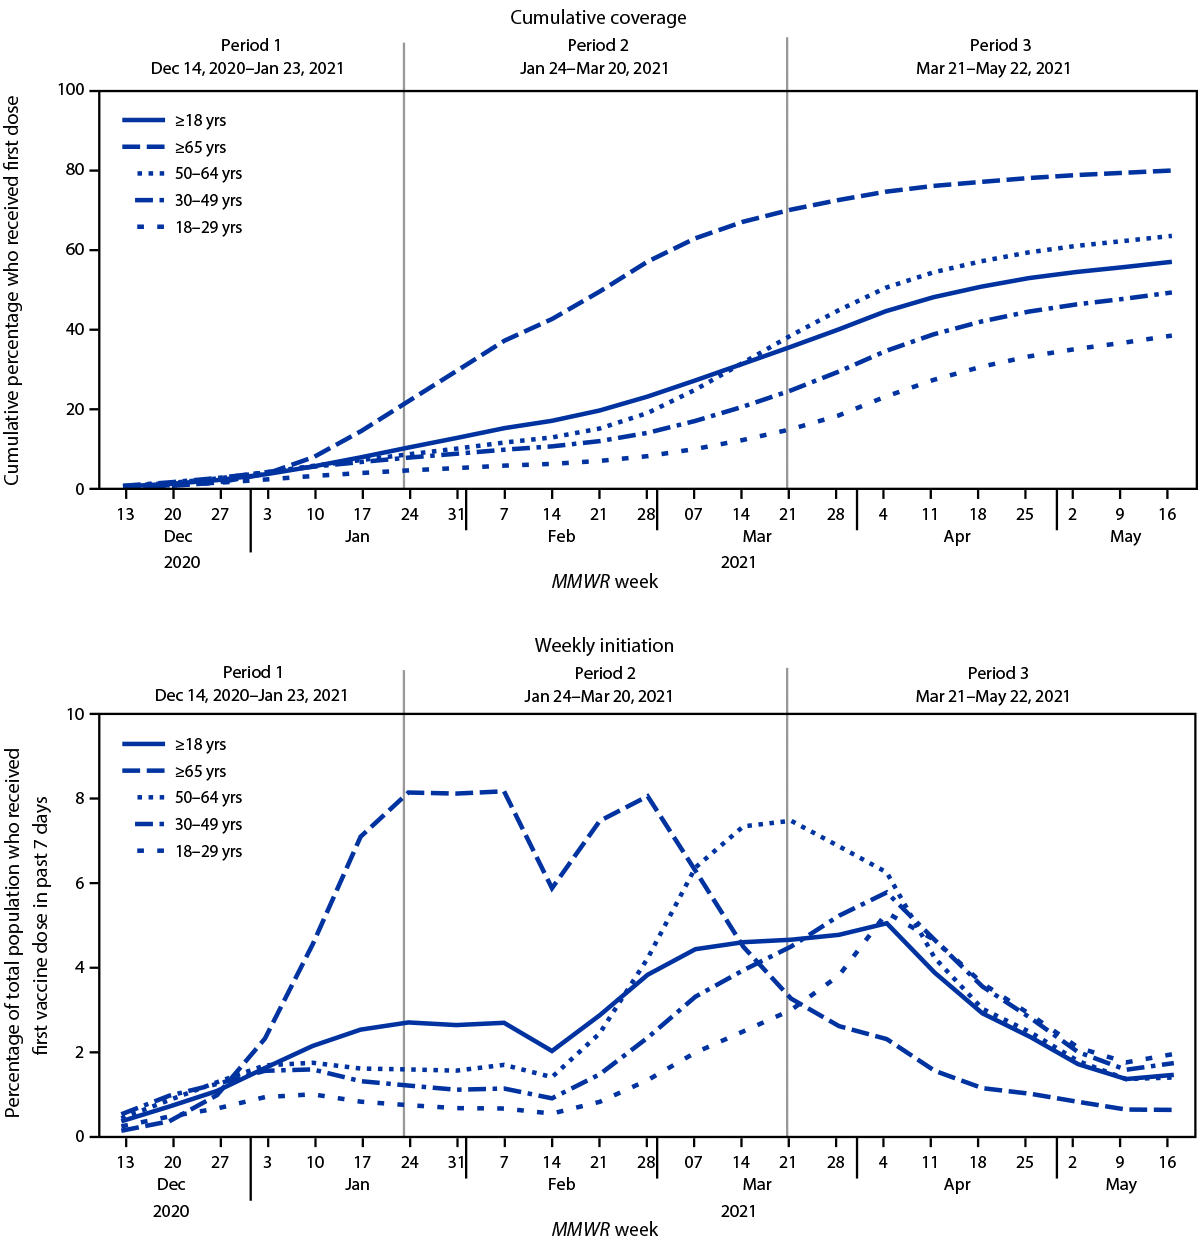 The figure shows two charts indicating trends in COVID-19 vaccination cumulative coverage and weekly initiation among U.S. adults, by epidemiologic week and age group, December 14, 2020–May 22, 2021.